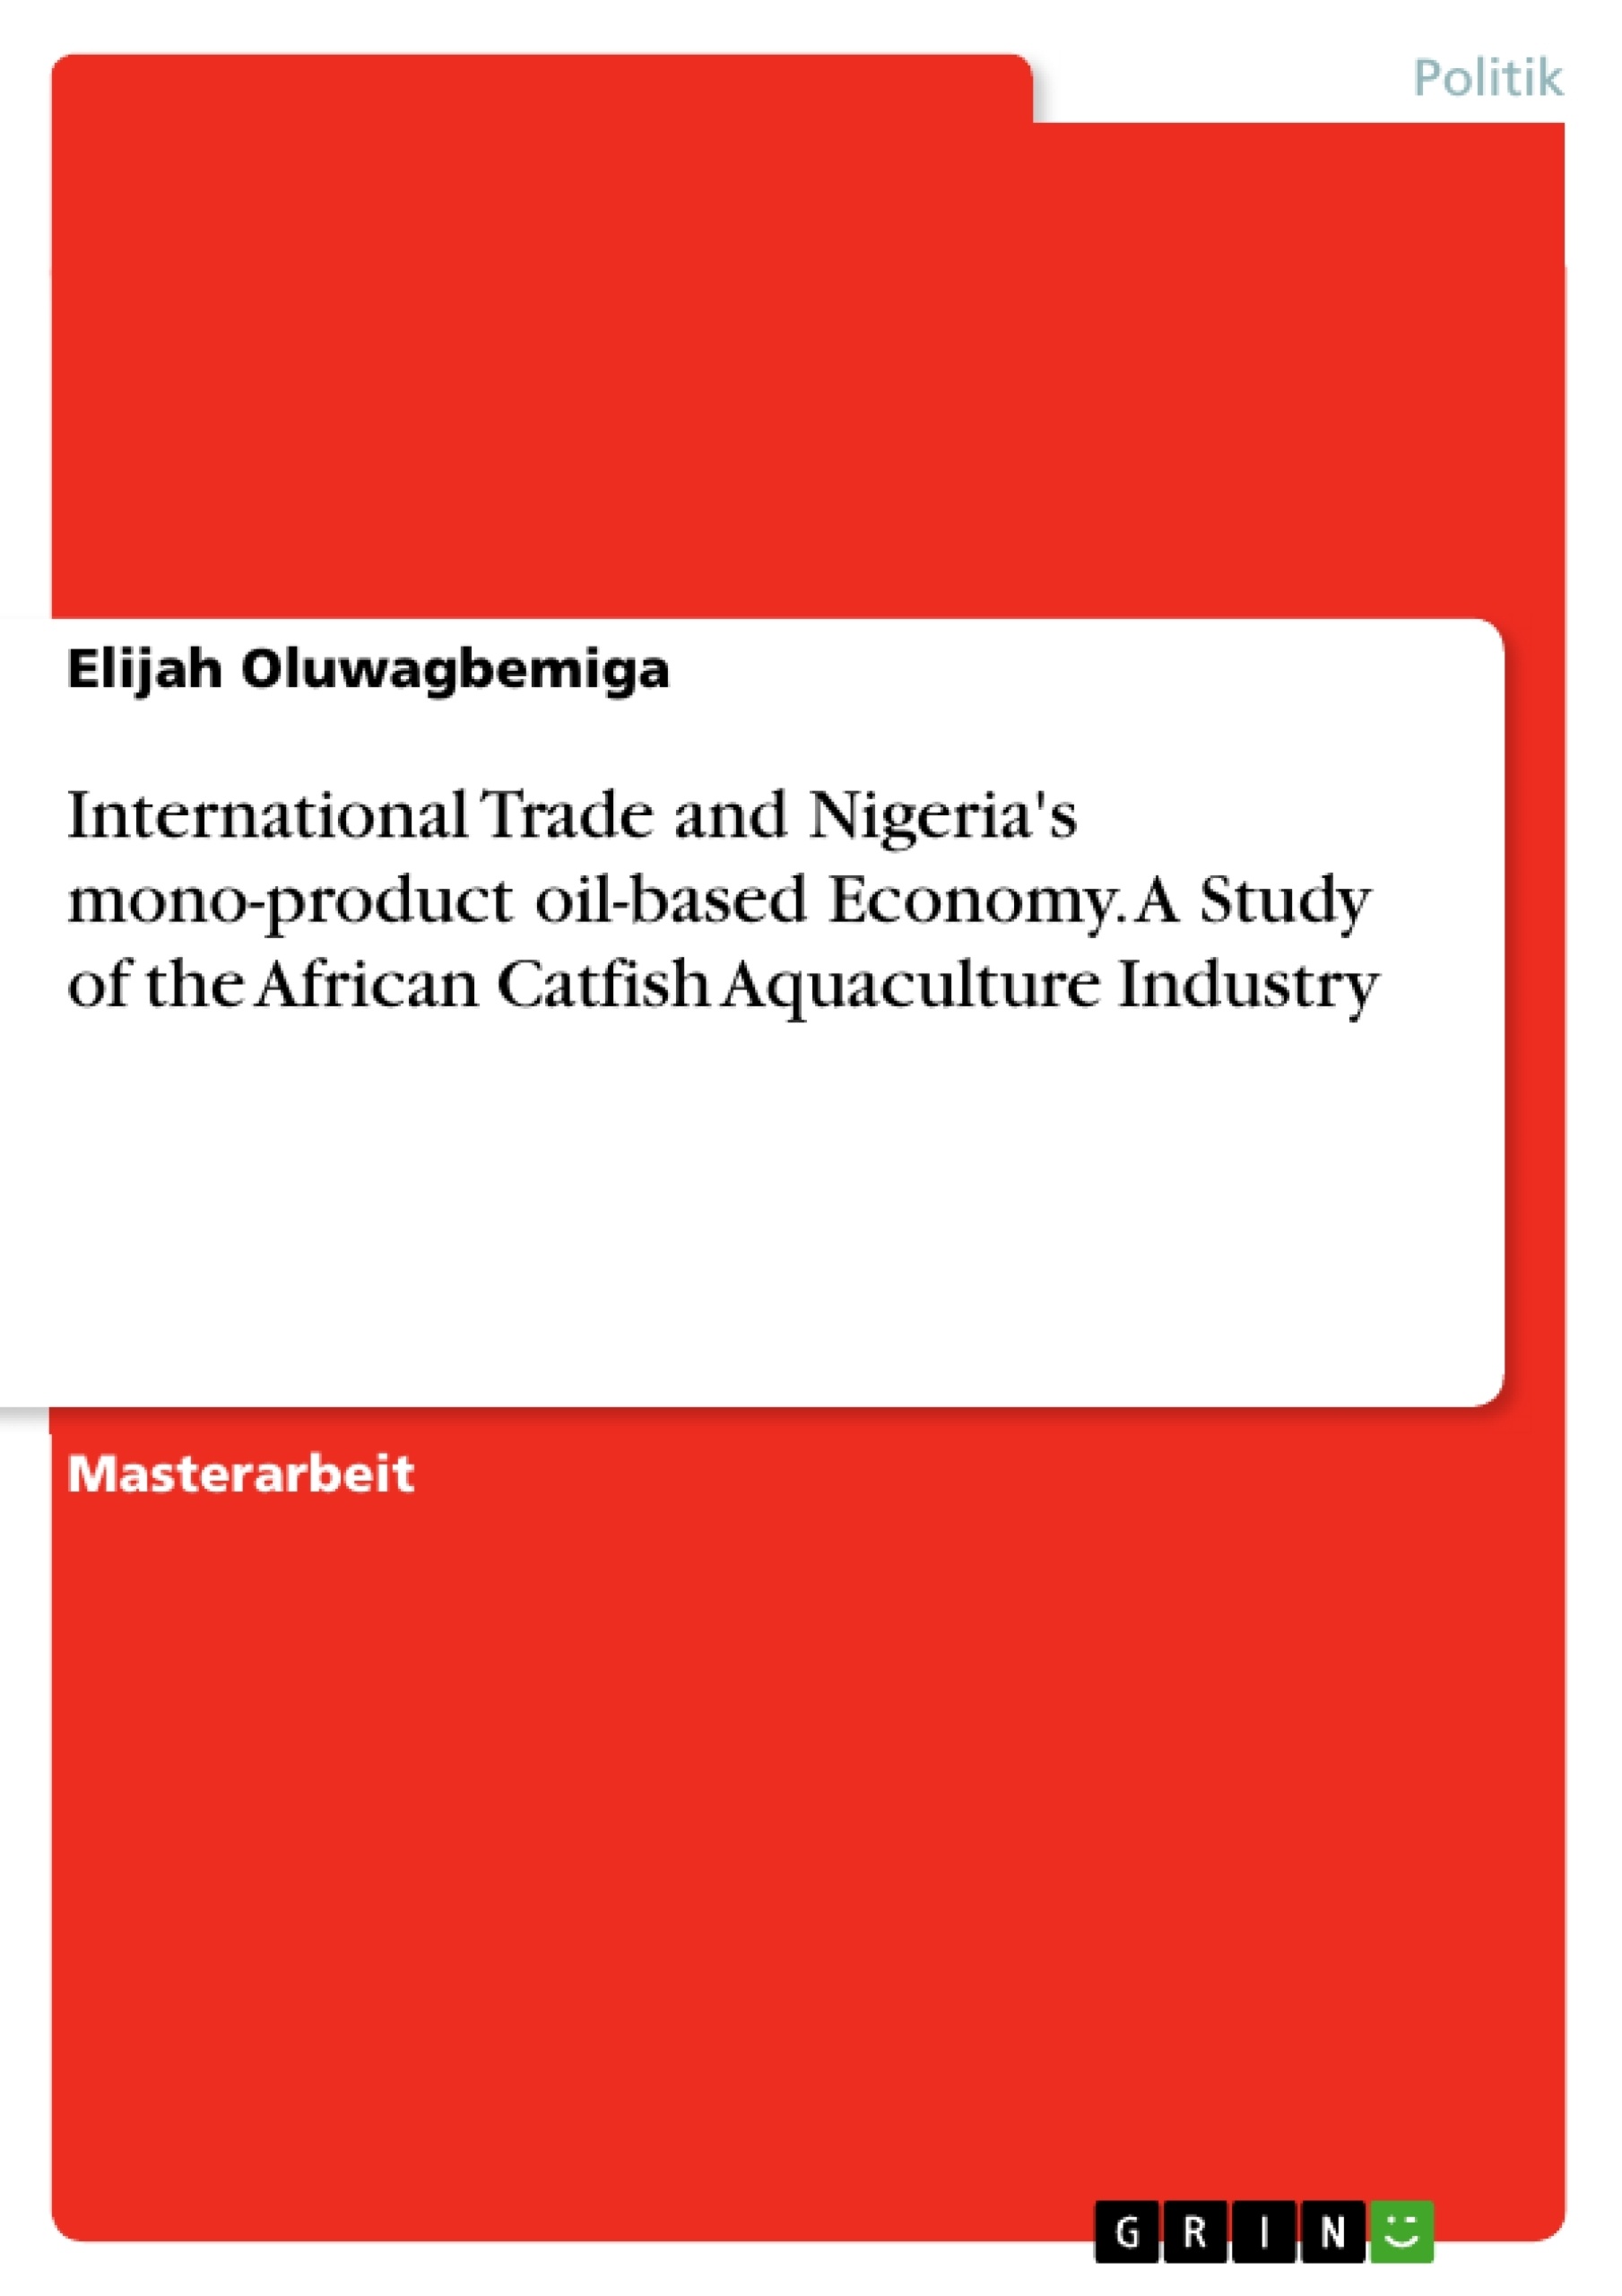 Titre: International Trade and Nigeria's mono-product oil-based Economy. A Study of the African Catfish Aquaculture Industry